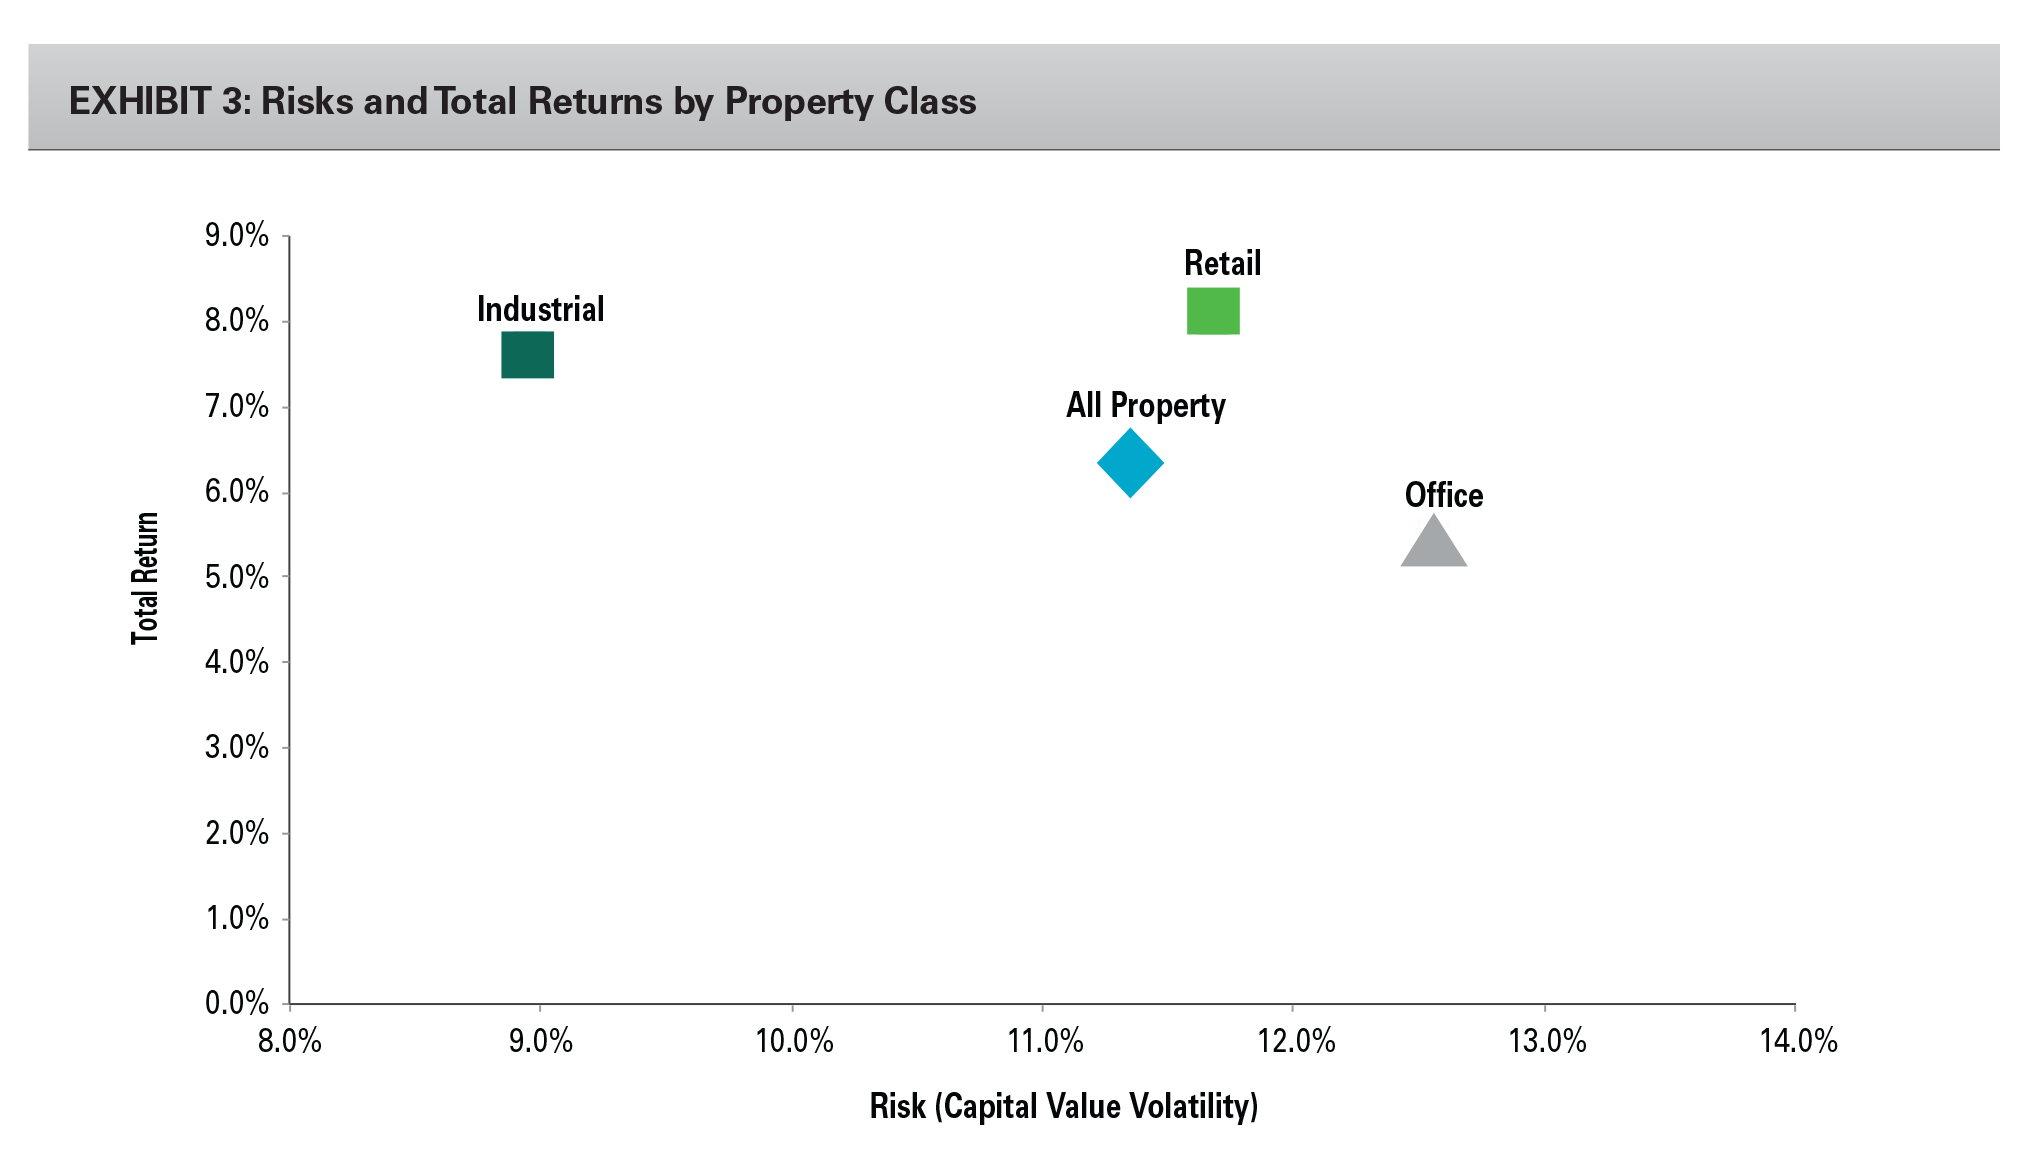 EXHIBIT 3: Risks and Total Returns by Property Class